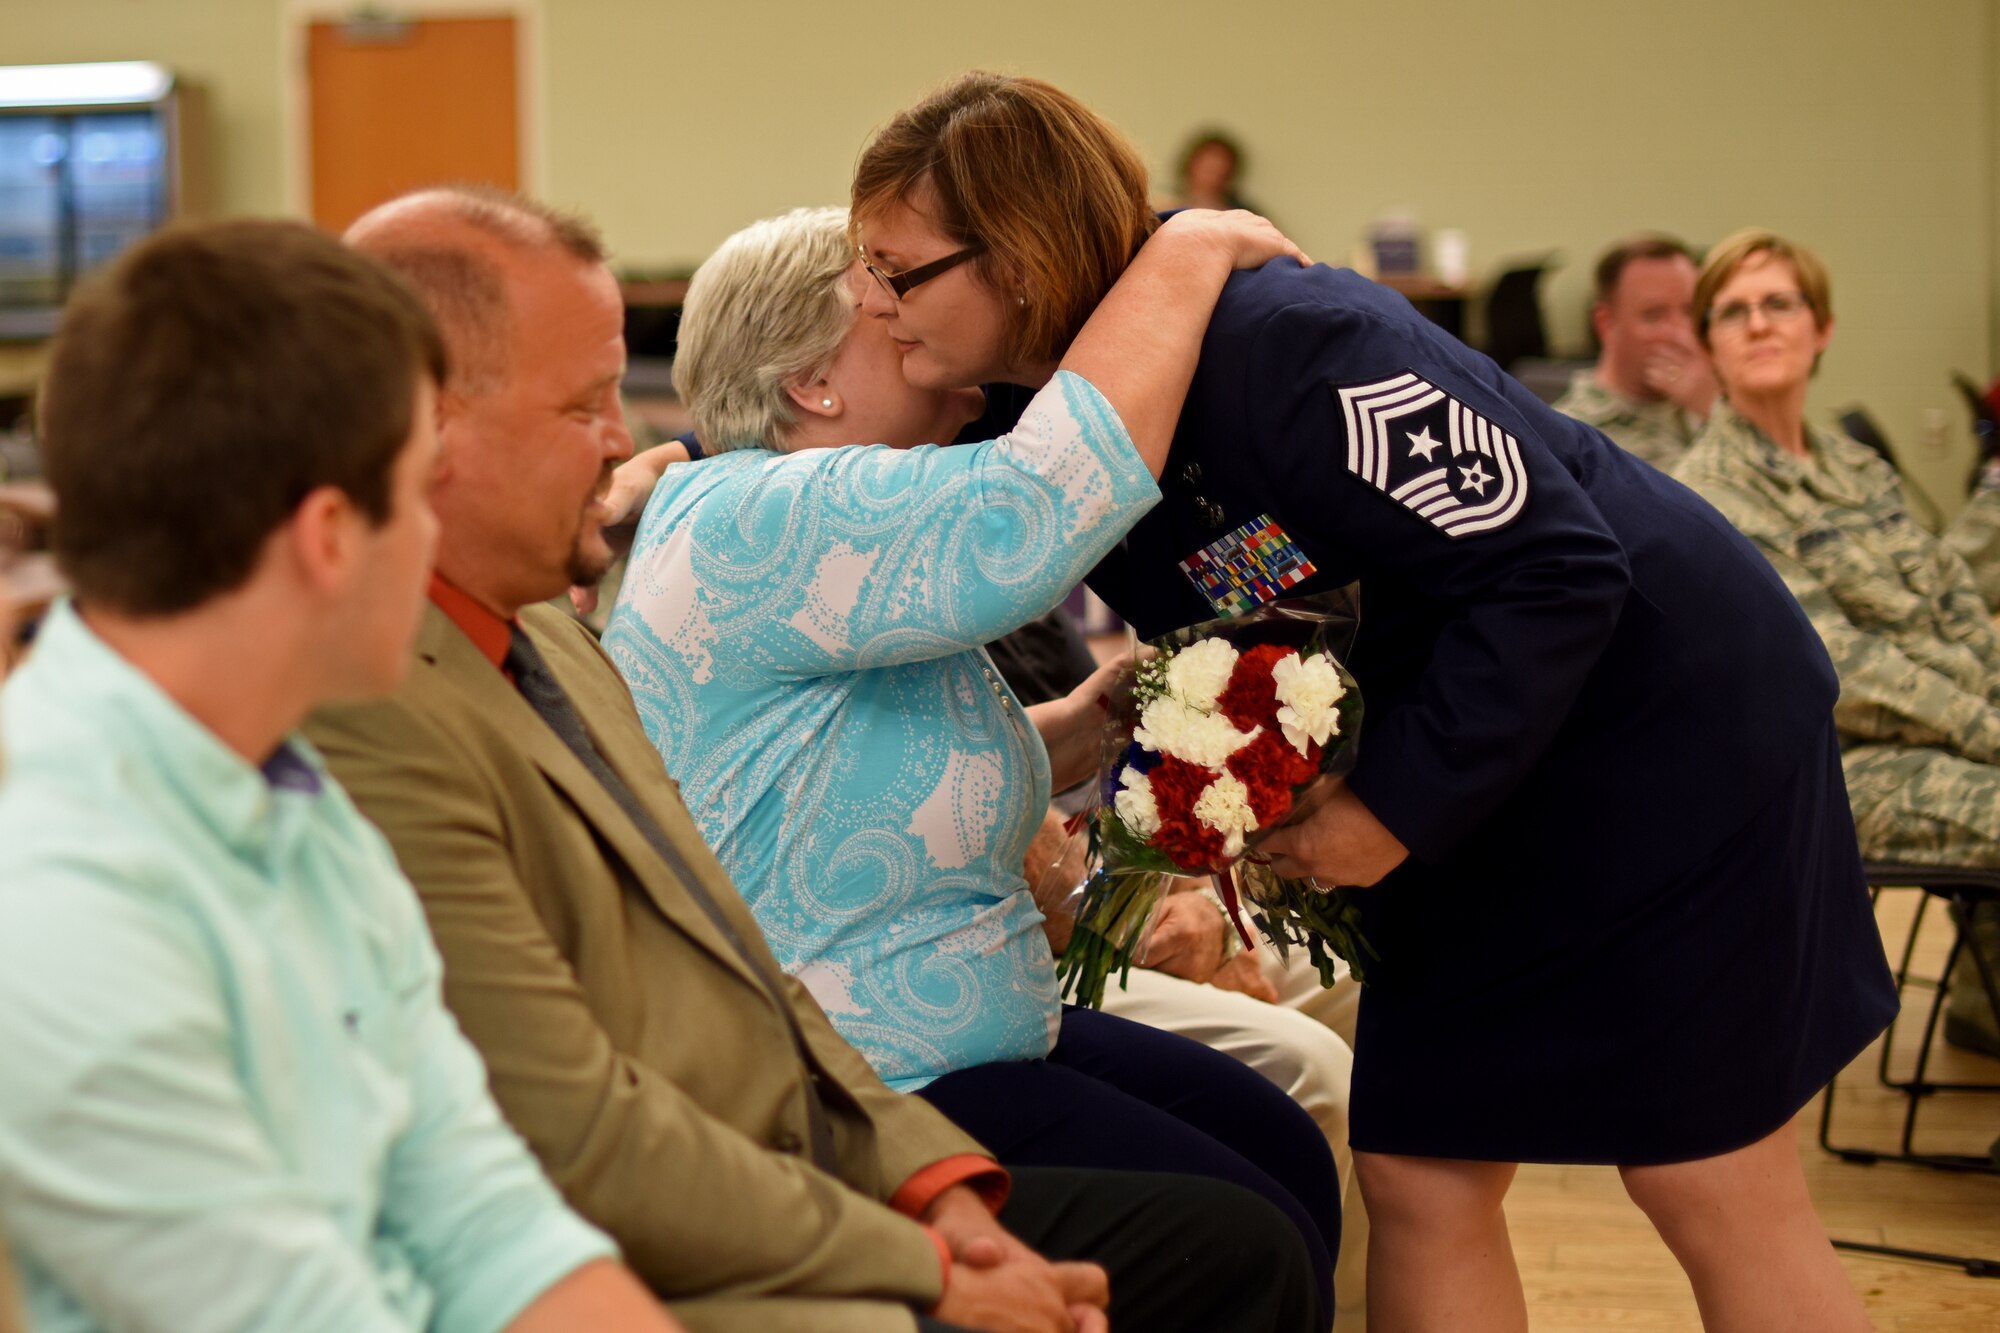 U.S. Air Force Chief Master Sgt. Kelly Gibbs, 121st Air Refueling Wing command chief, hugs her mother during an assumption of command ceremony on June 11, 2016, Rickenbacker Air National Guard Base, Ohio. As the unit's newest command chief, Chief Master Sgt. Gibbs is responsible for advising the commander on matters of mission effectiveness; readiness; training and the health, morale and welfare of all 121 ARW enlisted members. (U.S. Air National Guard photo by Senior Airman Wendy Kuhn/Released)